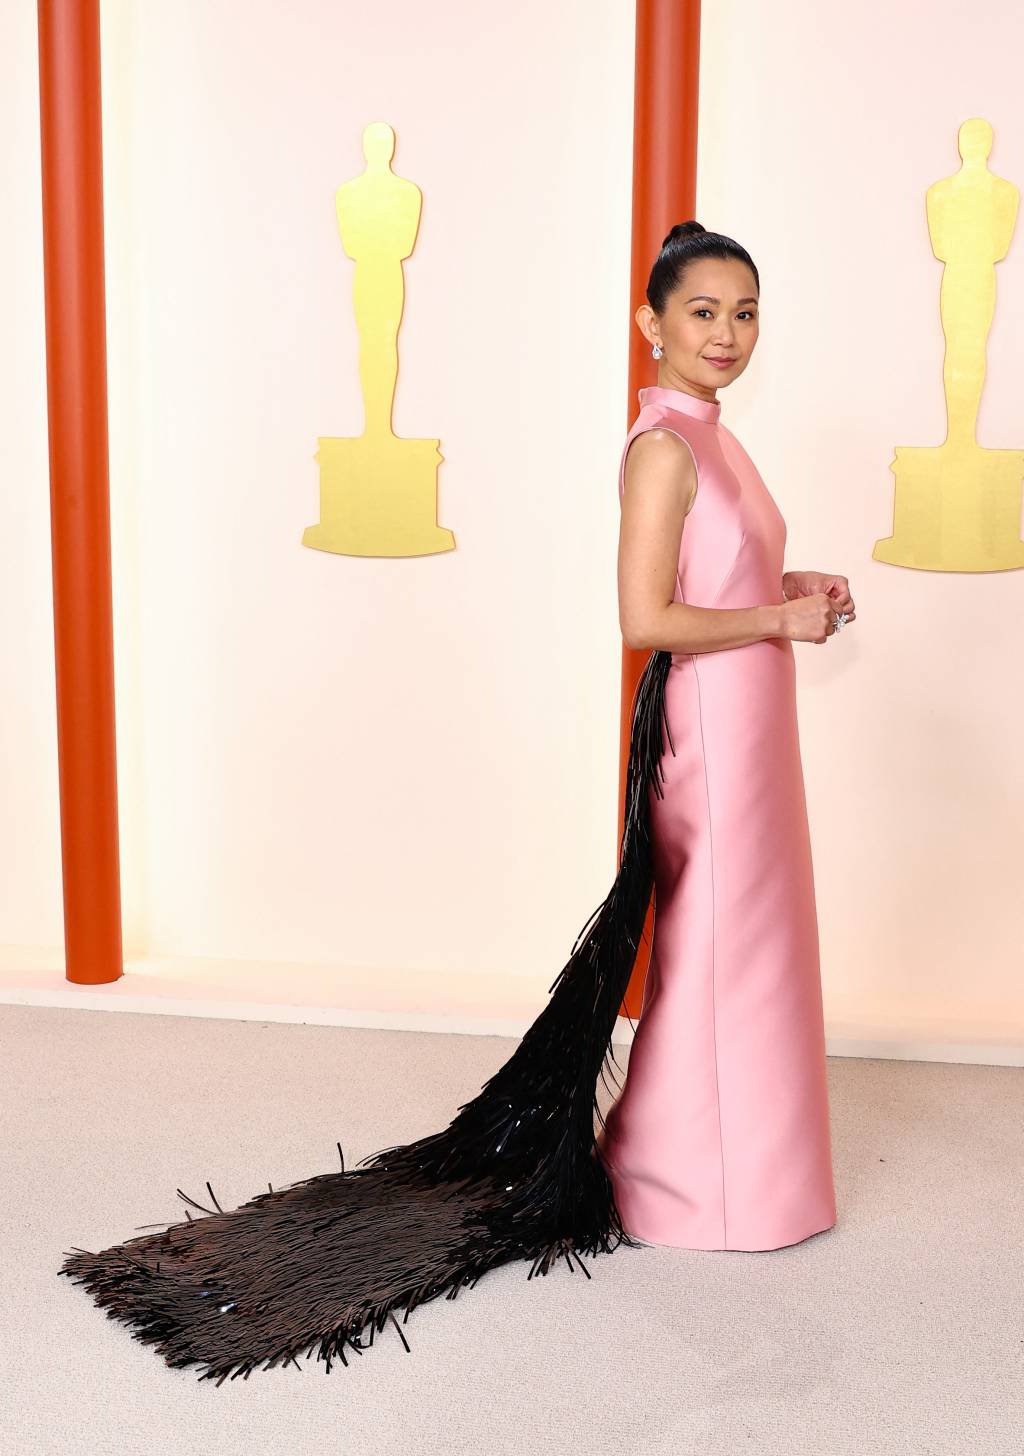 HOLLYWOOD, CALIFORNIA - MARCH 12: Hong Chau attends the 95th Annual Academy Awards on March 12, 2023 in Hollywood, California. Arturo Holmes/Getty Images /AFP (Photo by Arturo Holmes / GETTY IMAGES NORTH AMERICA / Getty Images via AFP)